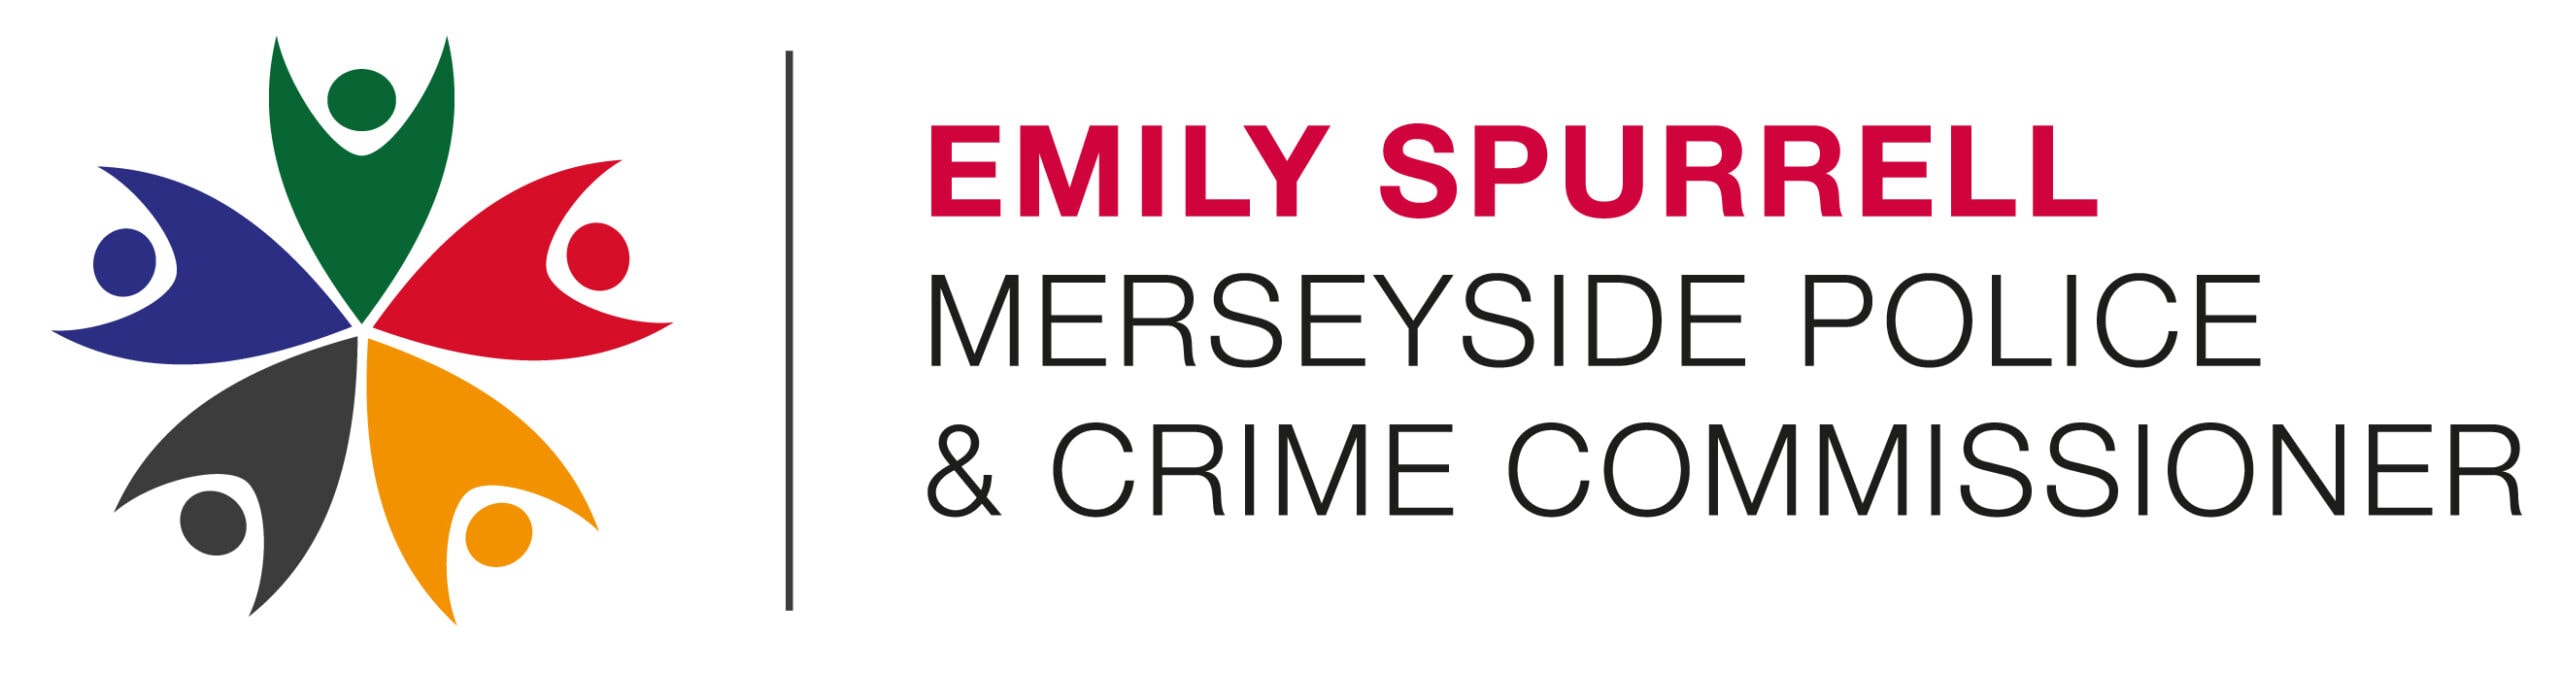 Merseyside Police and Crime Commissioner logo